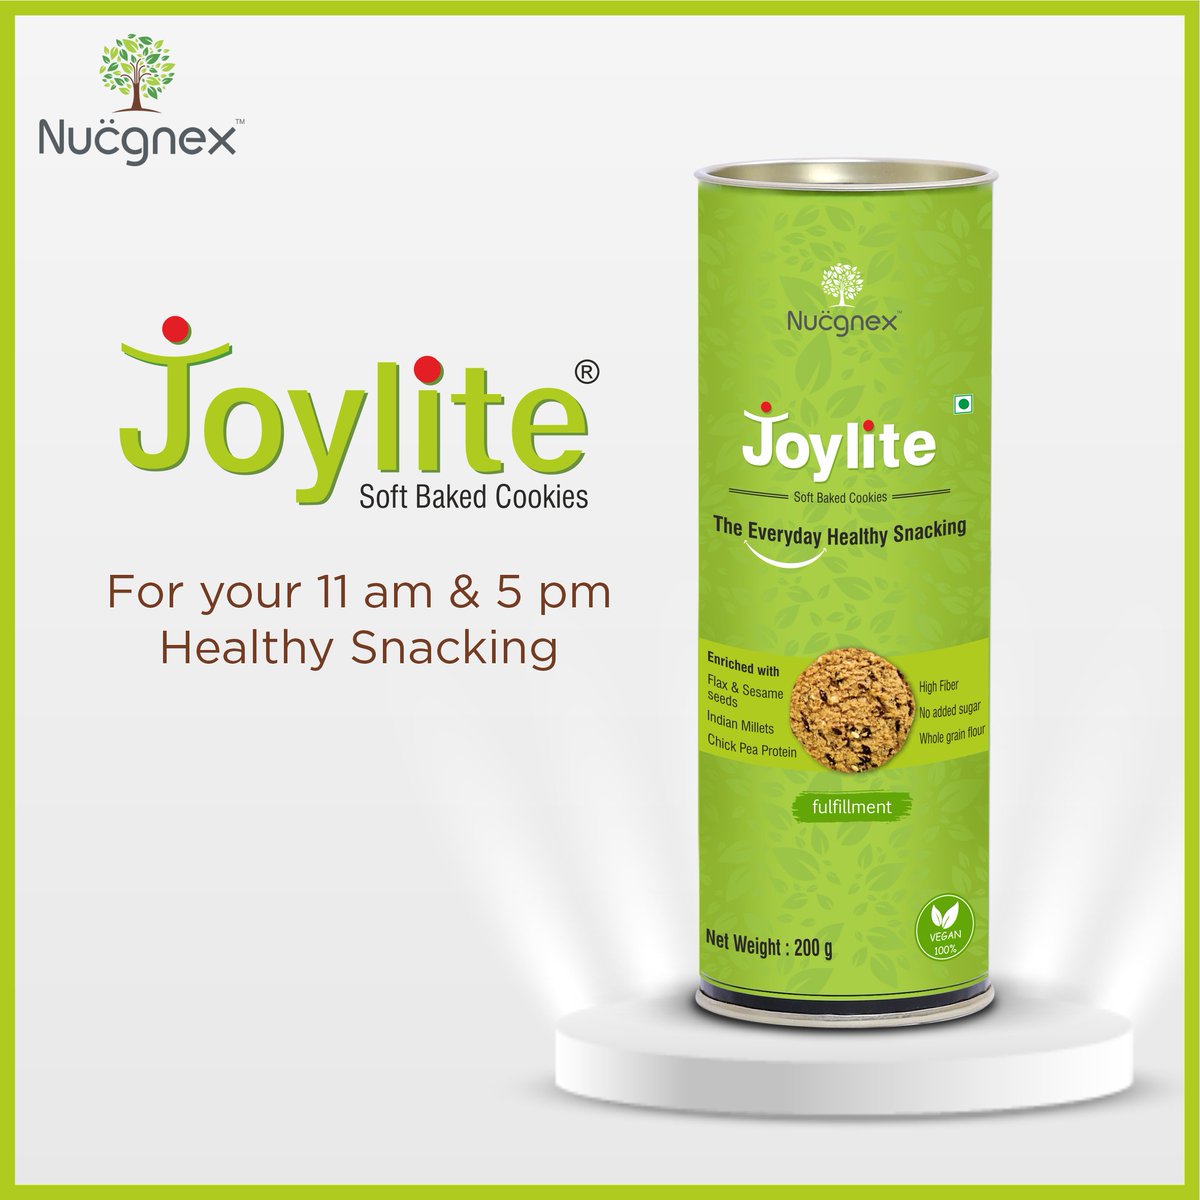 Binge snacking is now 100% vegan, healthier and guilt-free!

Joylite, sugar-free cookies are made of whole grains, millets, flaxseeds, sesame seeds, & chickpea protein that make them protein and fibre dense.

#Nucgnex #NucgnexLifescience #CellularNutrition #JoyliteCookies